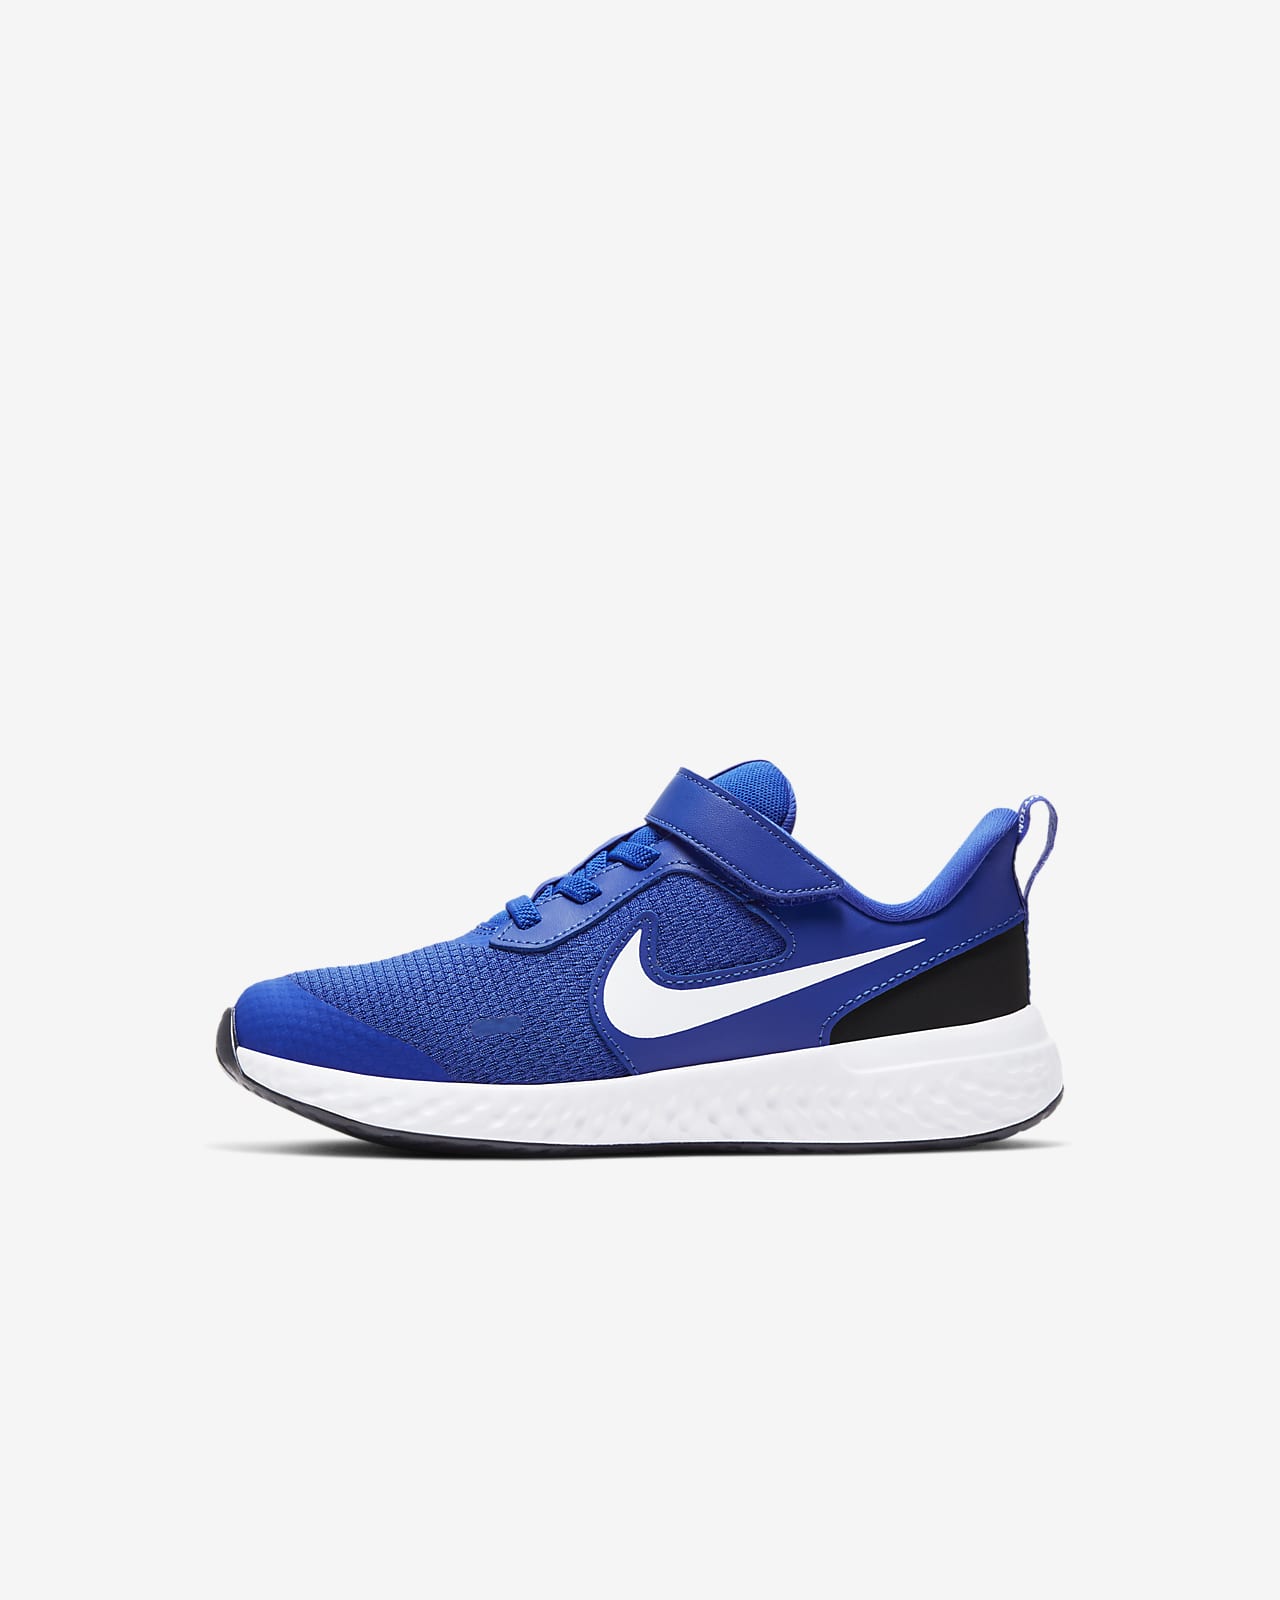 nike shoes with blue